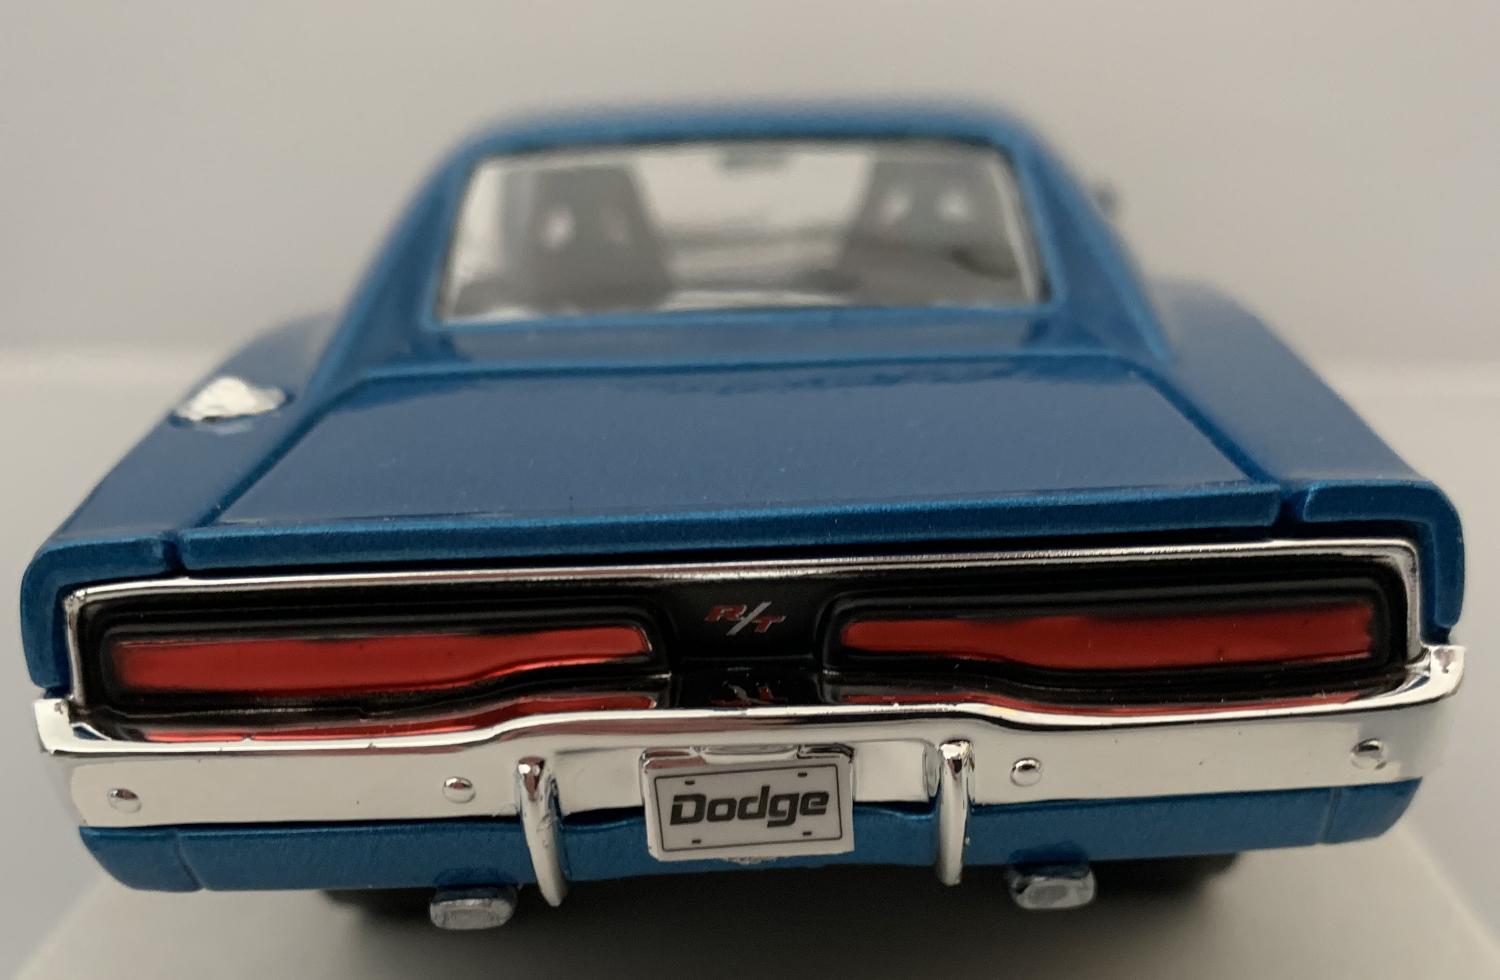 An excellent scale model of a Dodge Charger R/T decorated in bright blue with authentic graphics and silver wheels.  Features opening driver and passenger doors